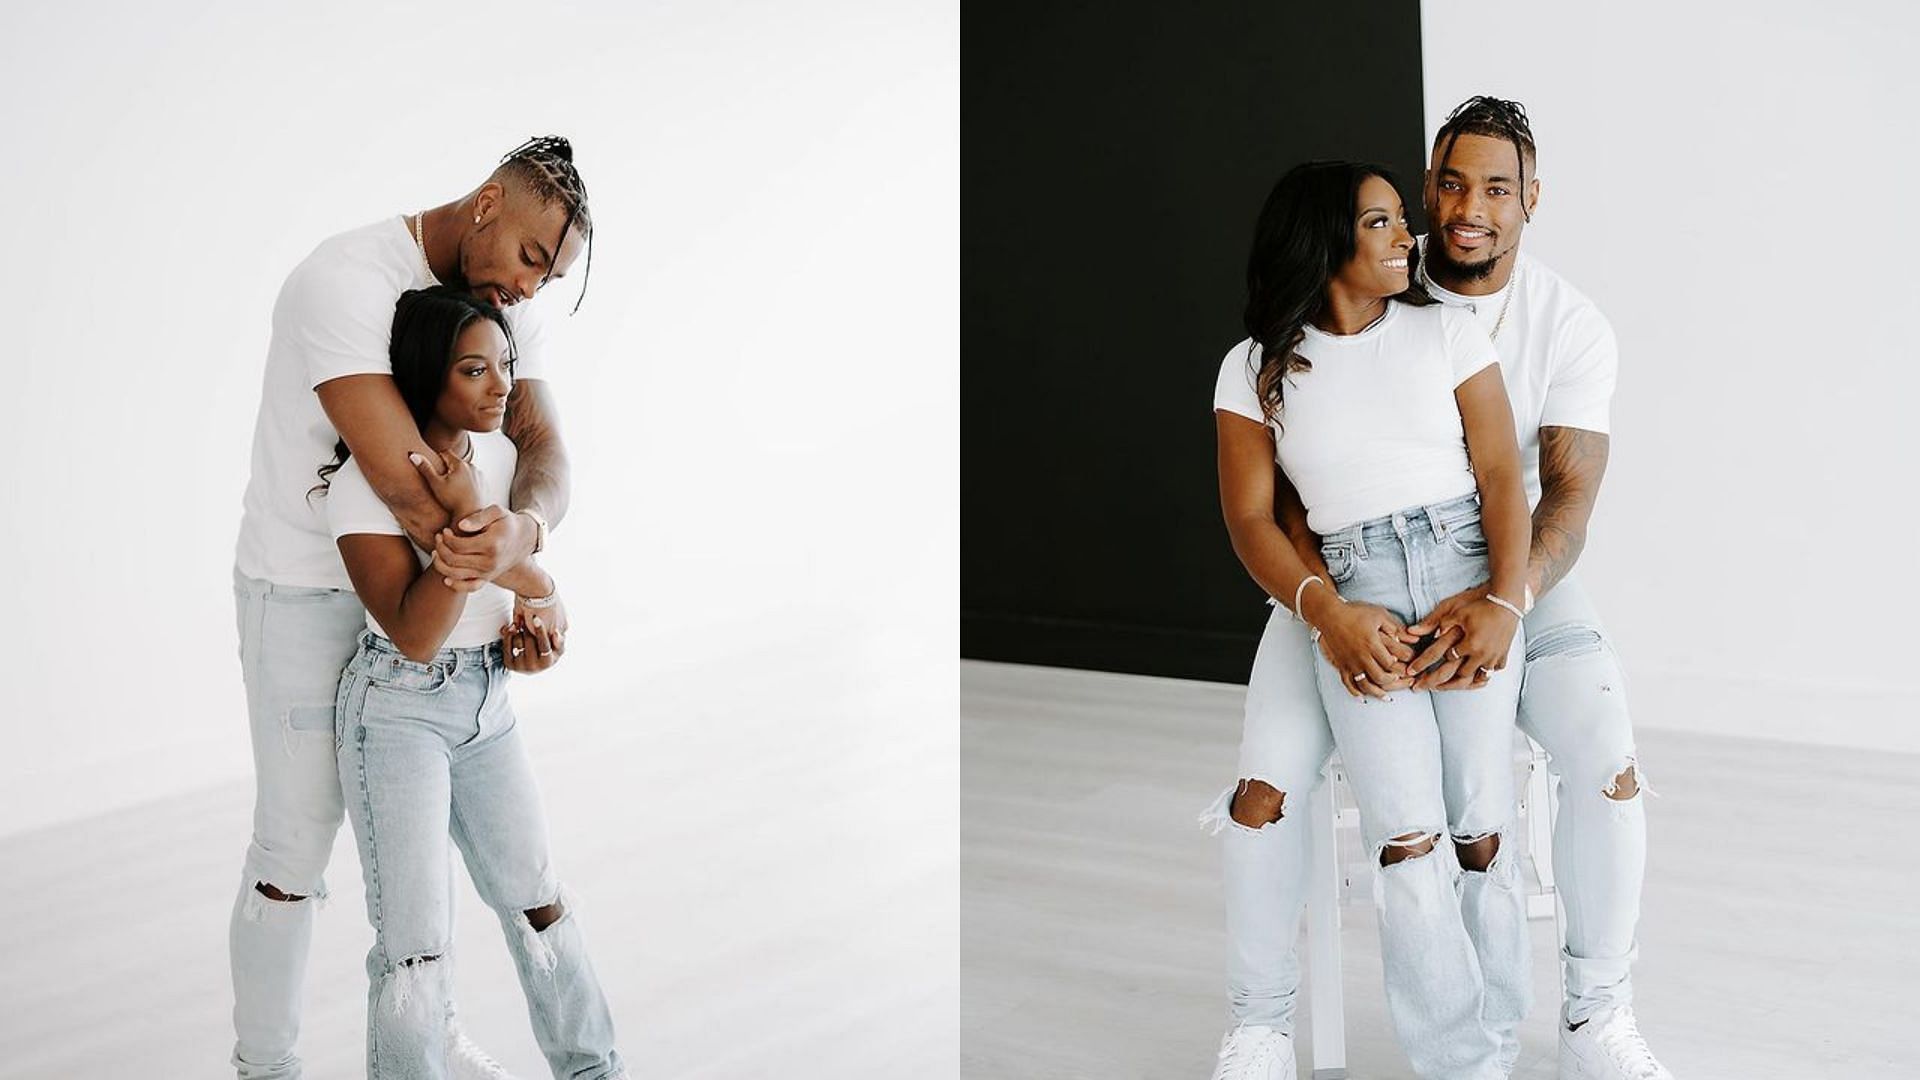 Jonathan Owens speaks on commitment issues during early stages of relationship with Simone Biles